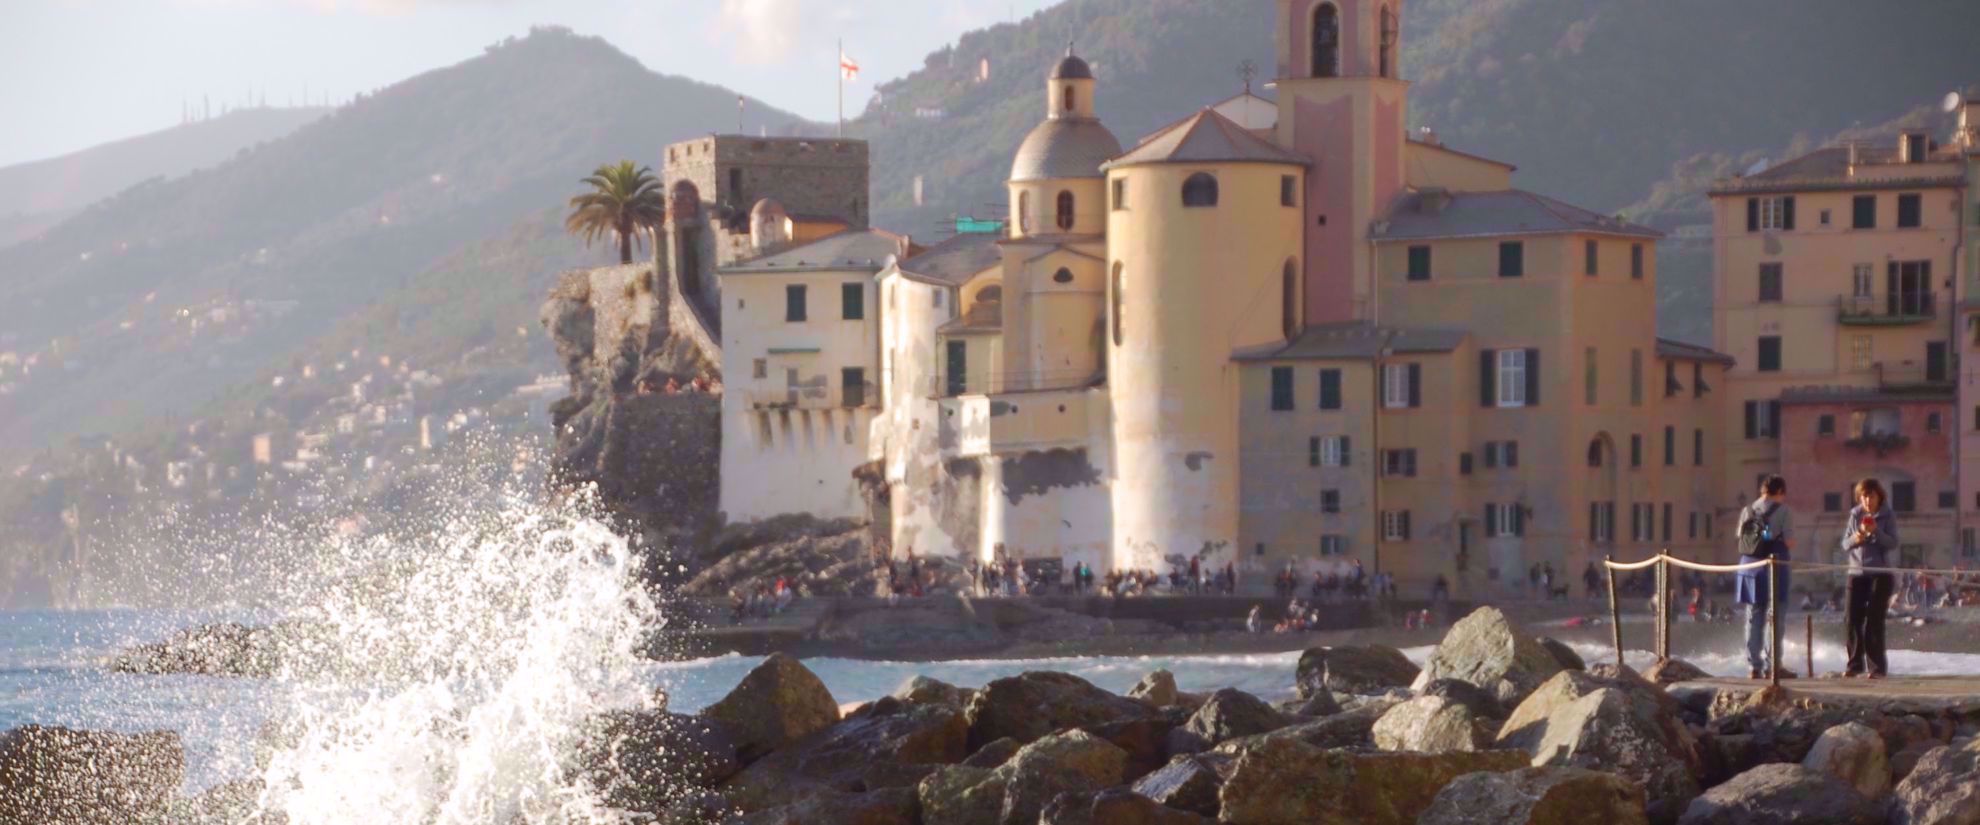 Waves crashing on rocks in italy with old building in background